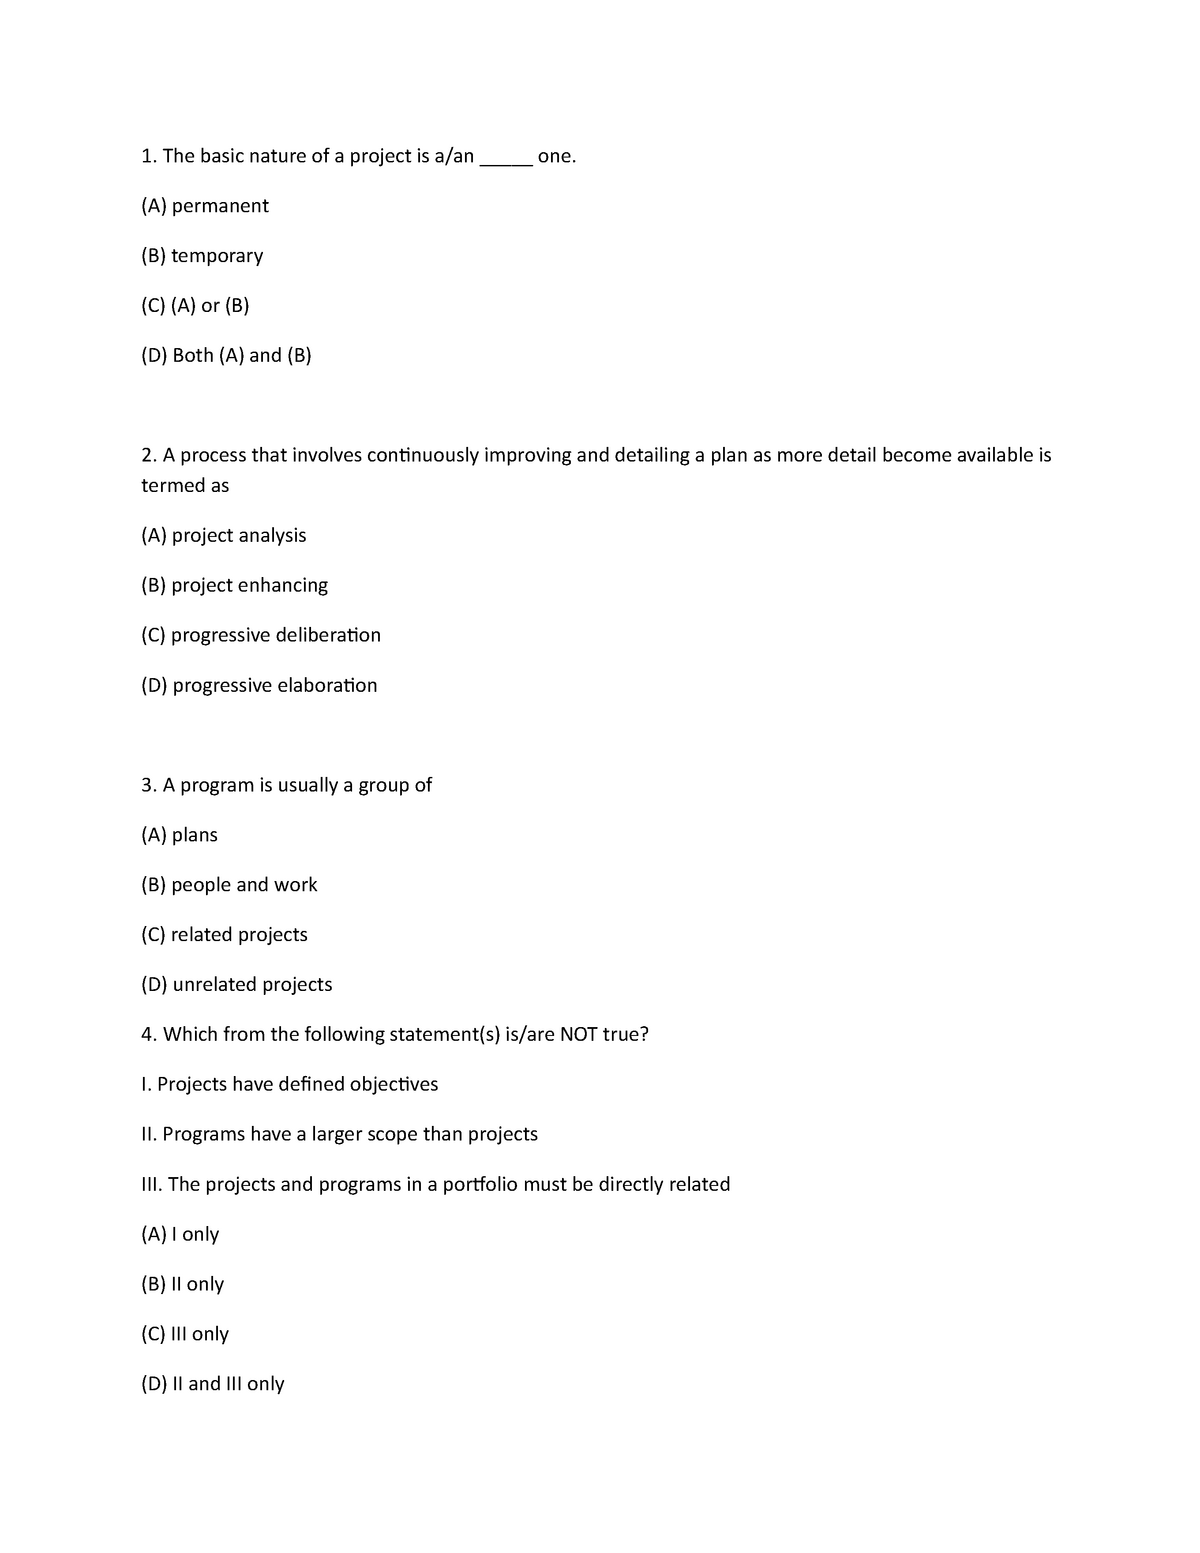 Mcq pm - mcq - The basic nature of a project is a/an _____ one. (A ...